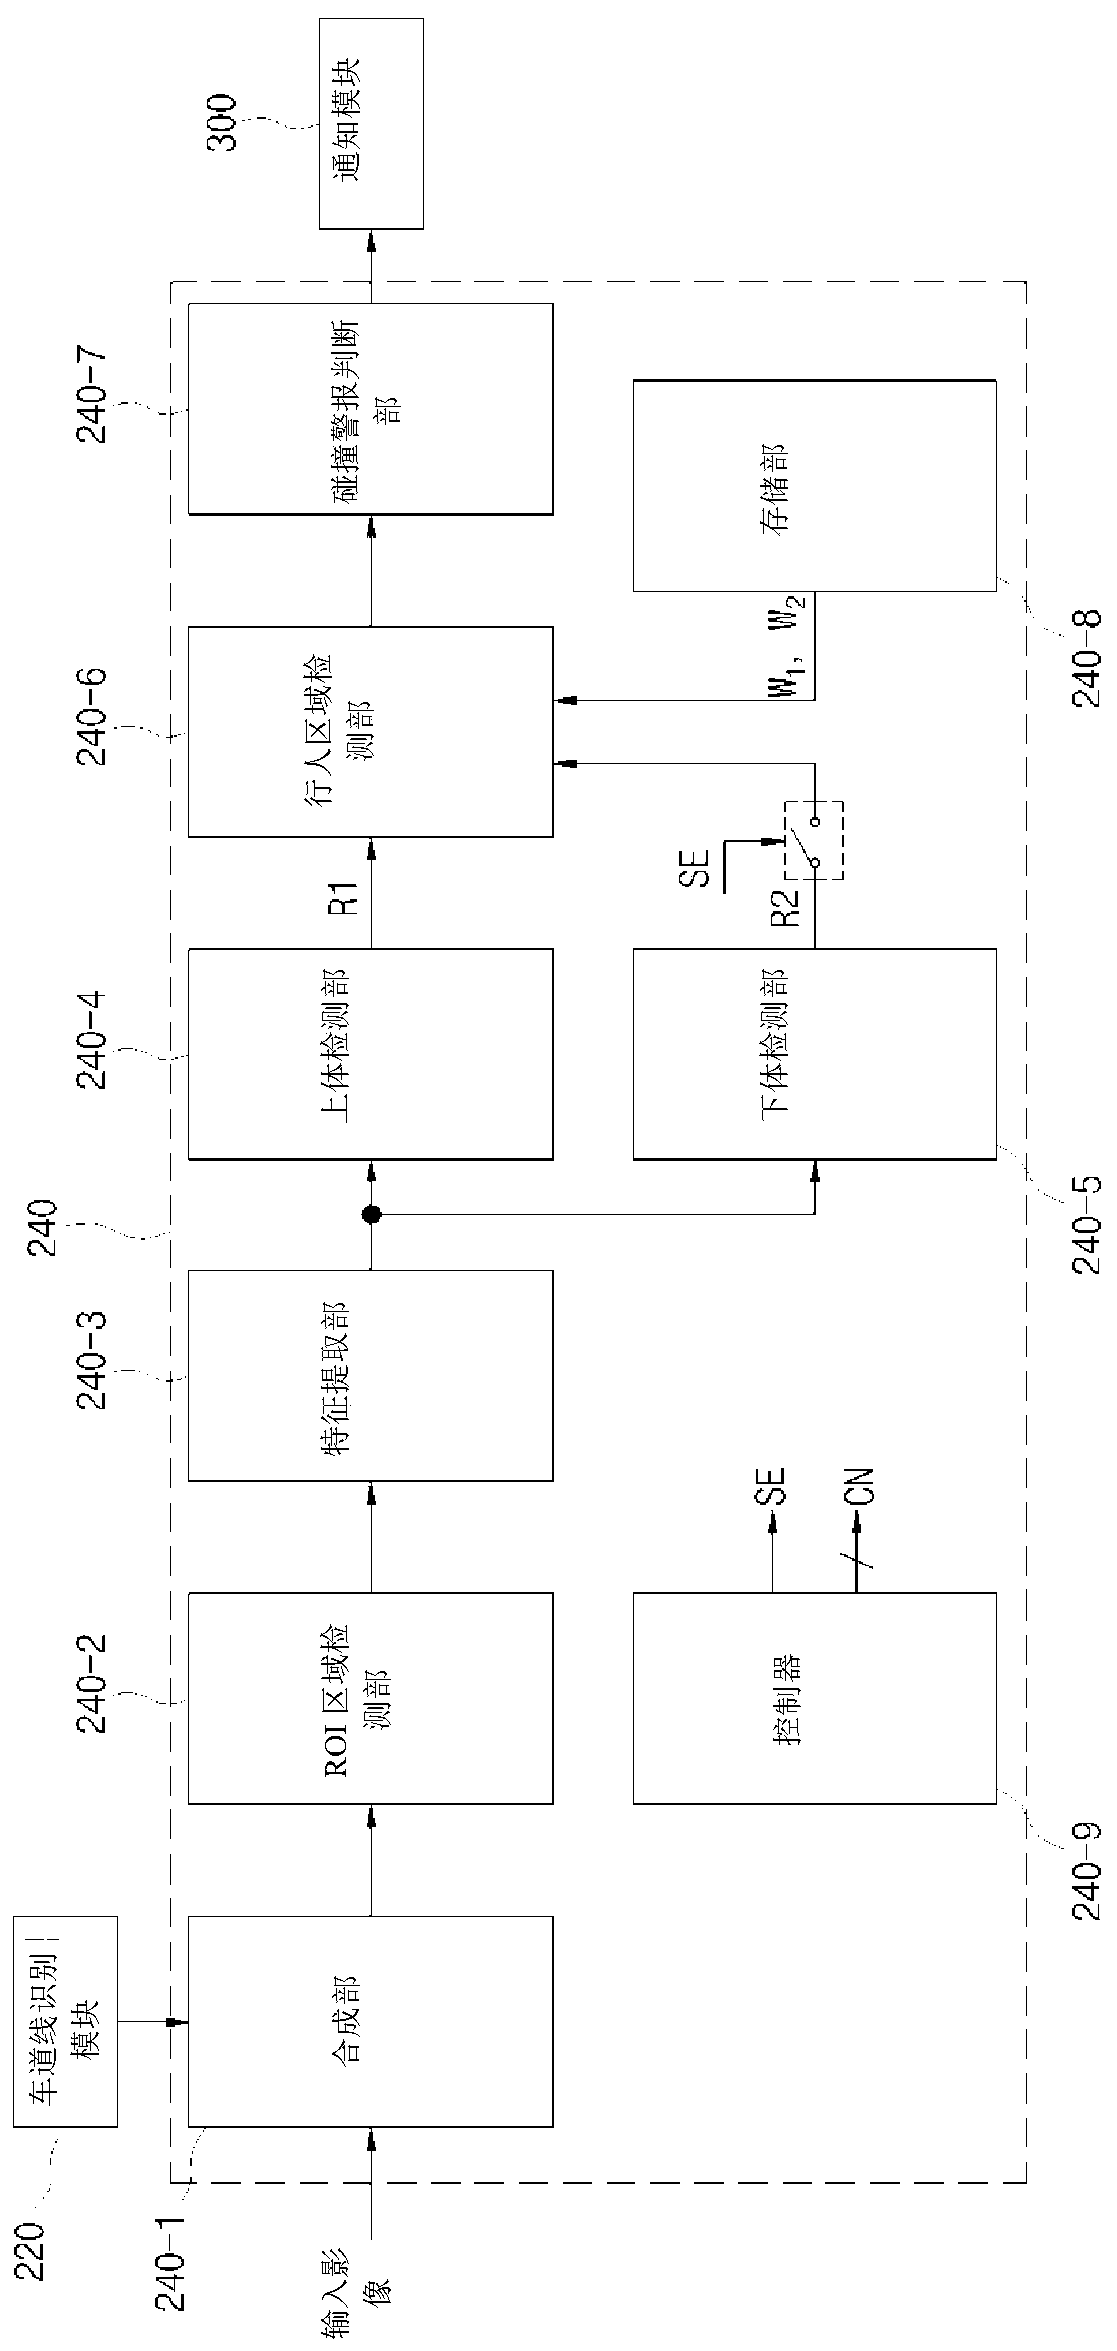 Image processing device and method for detecting pedestrians